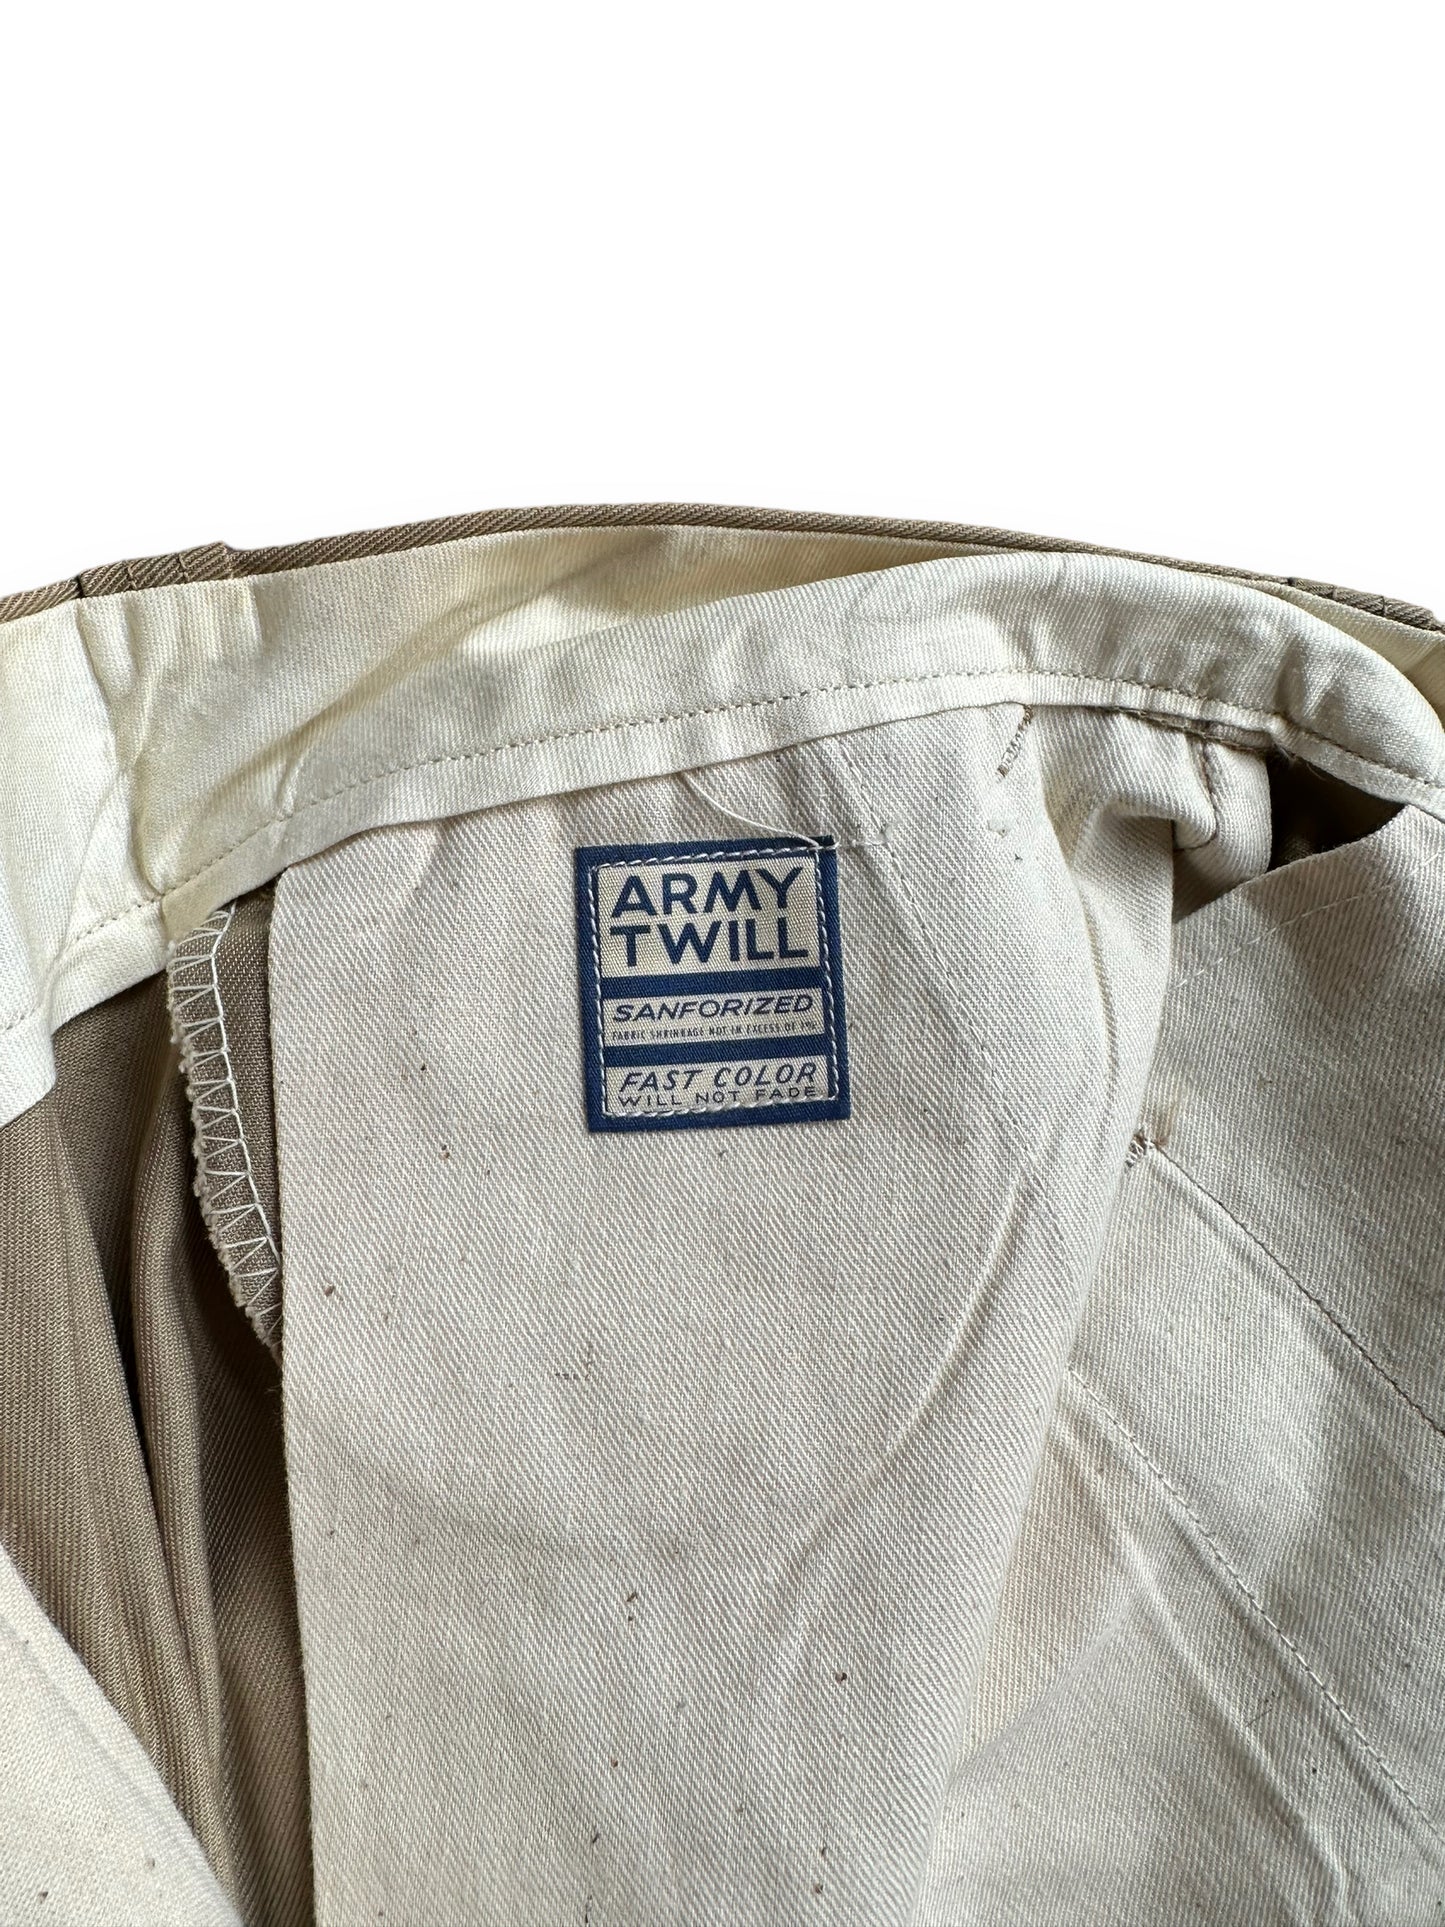 Inner tag on Vintage Deadstock Big Ben Military Chinos 32 x 30 | Barn Owl Vintage Seattle | Vintage Military Seattle